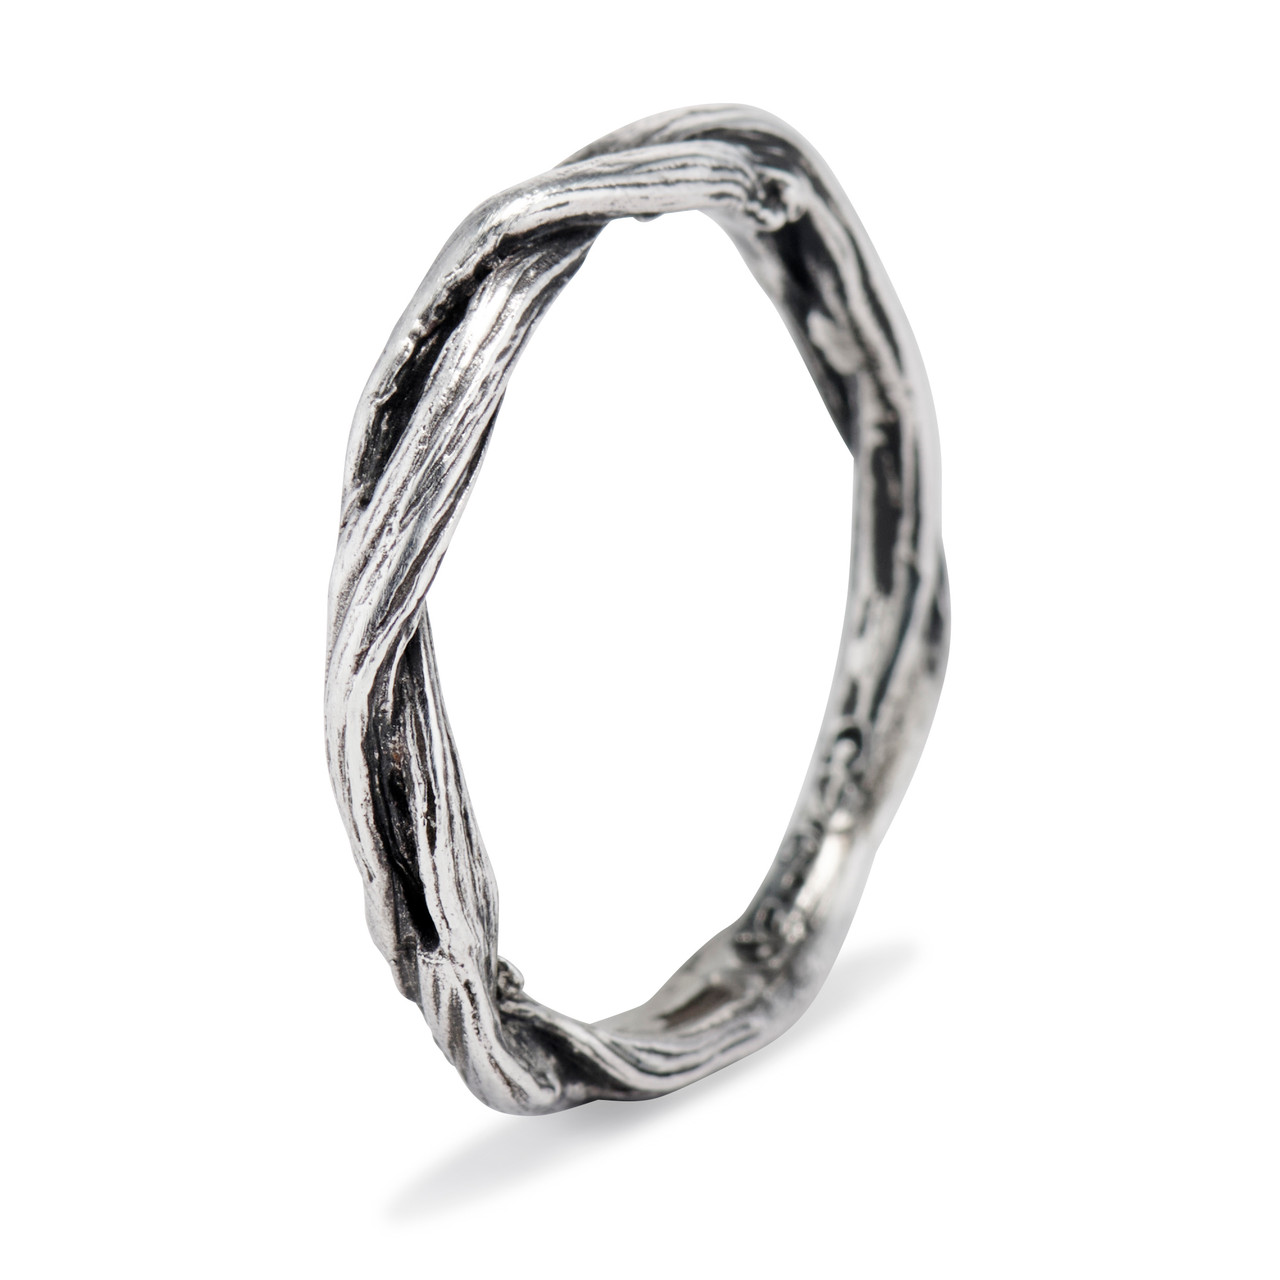 Women's Oxidized Silver Engagement Ring | Olivia Ewing